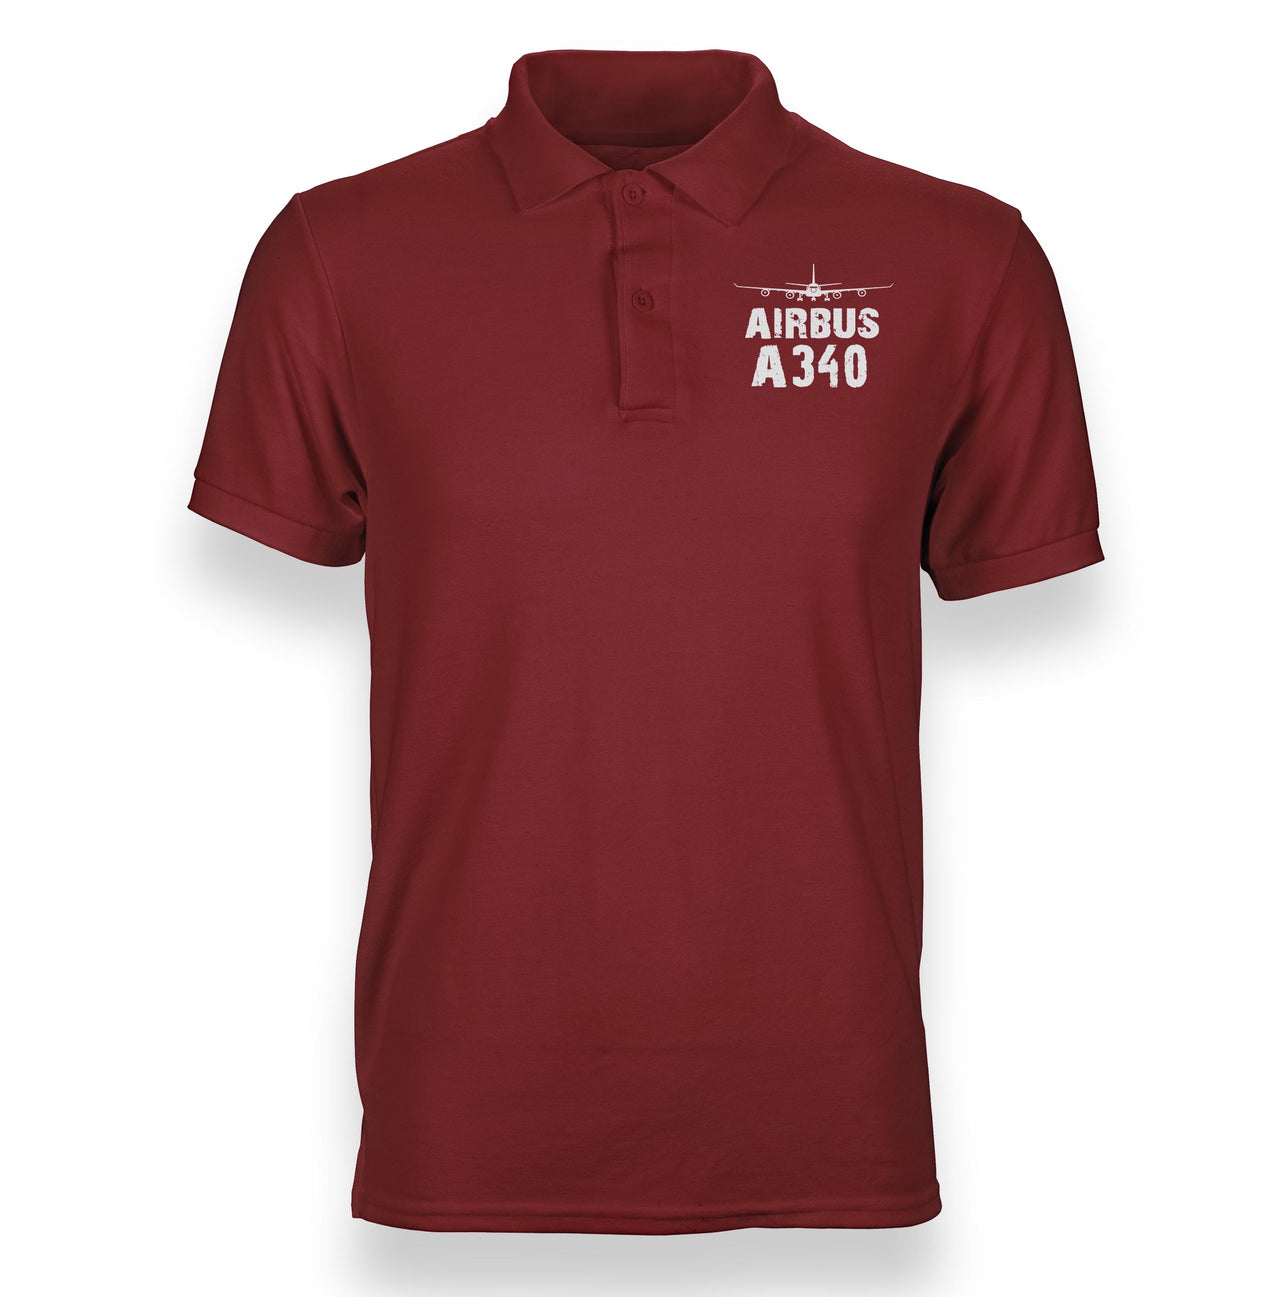 Airbus A340 & Plane Designed Polo T-Shirts